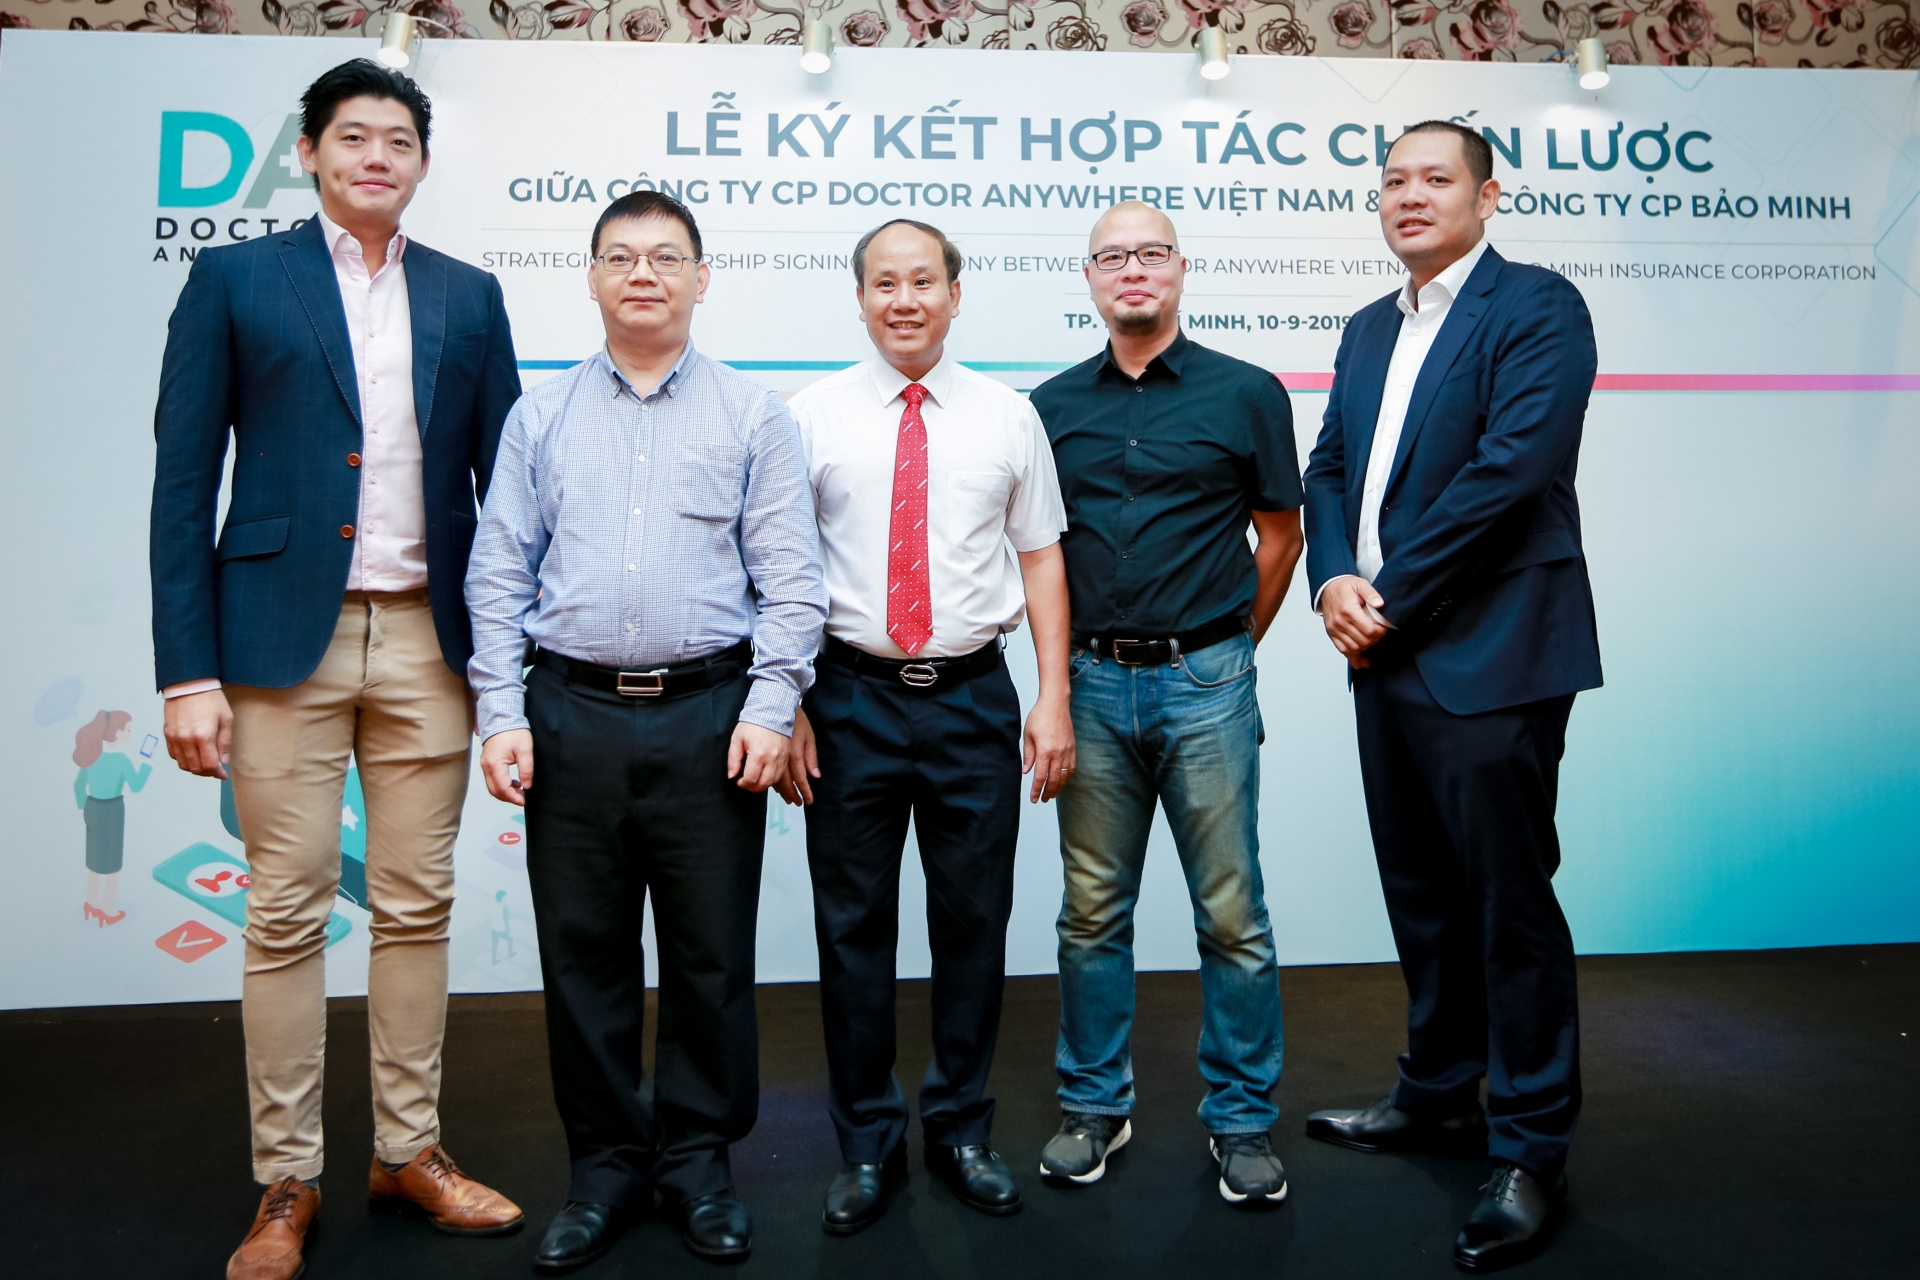 doctor anywhere ties up with bao minh insurance to digitise healthcare